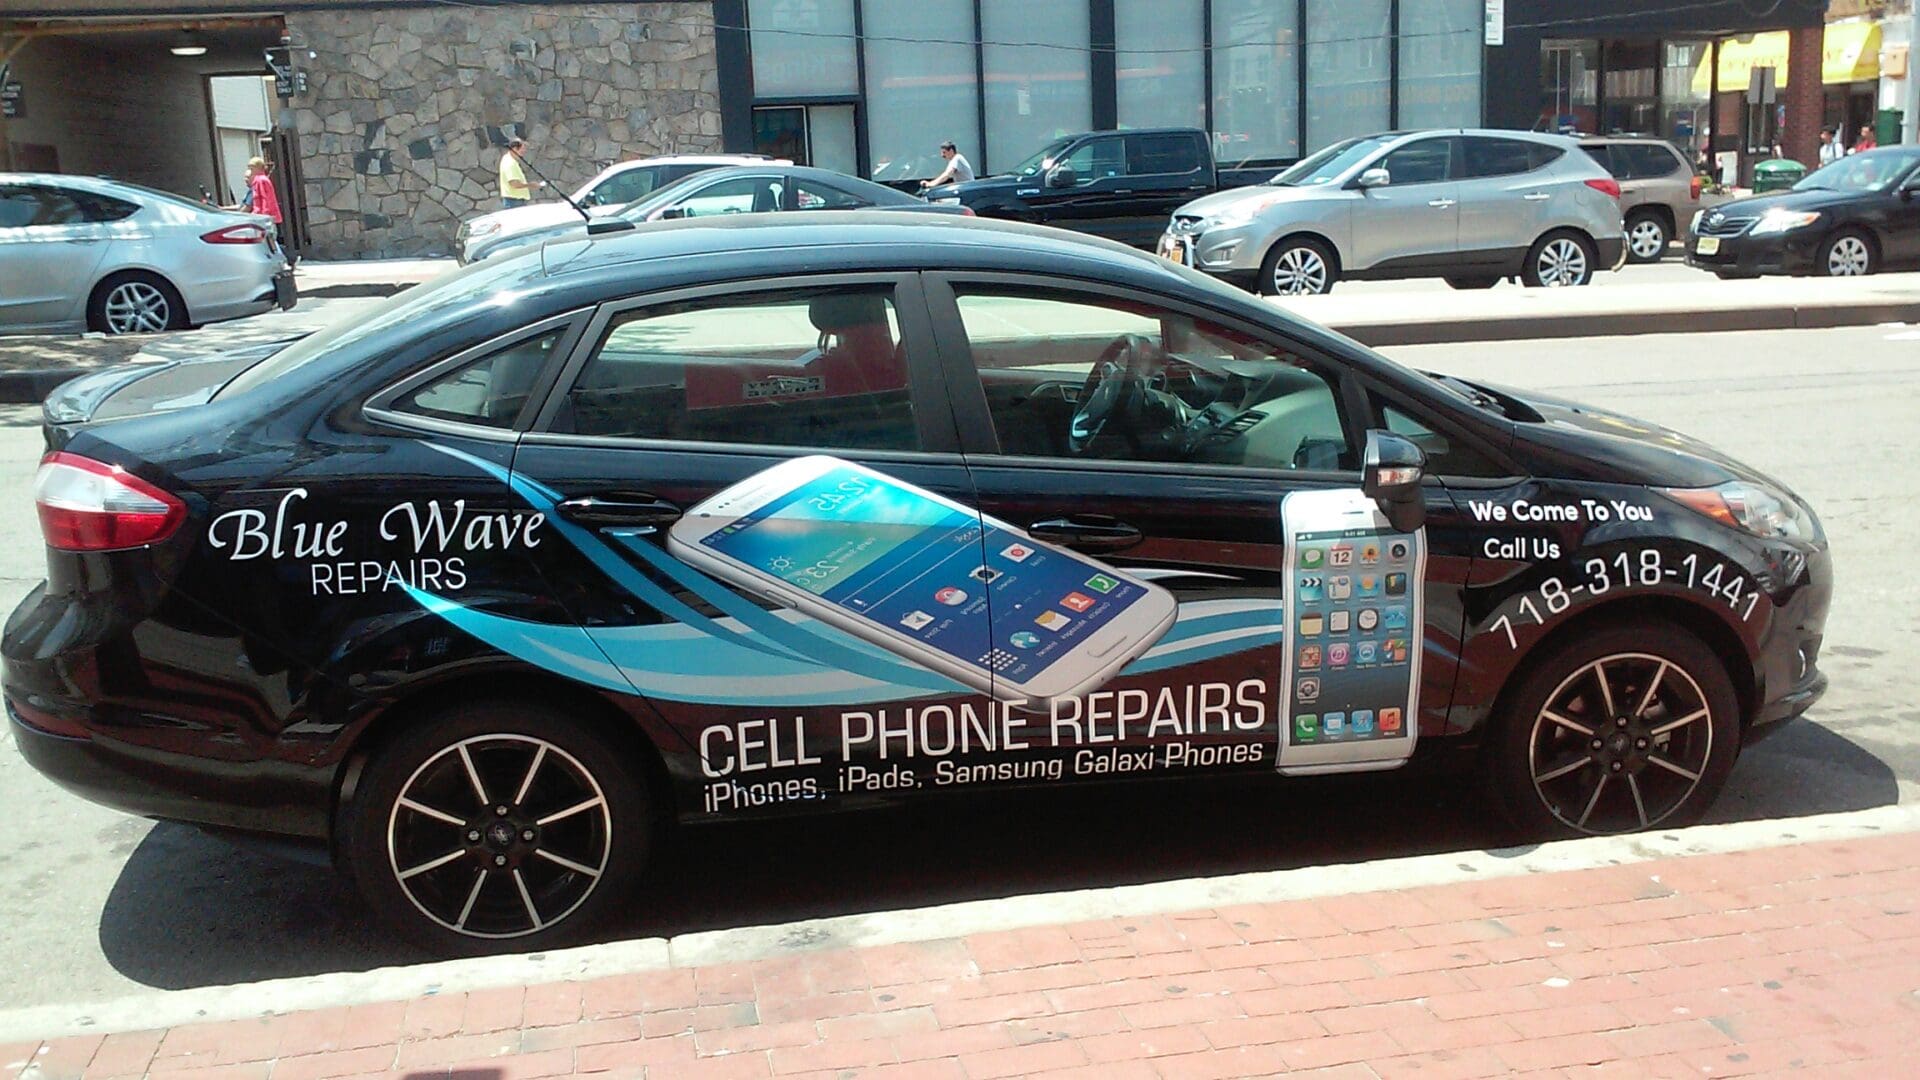 A black car parked on a street, adorned with advertisements for ADP USA Solutions Gallery, featuring imagery of phones and contact information.